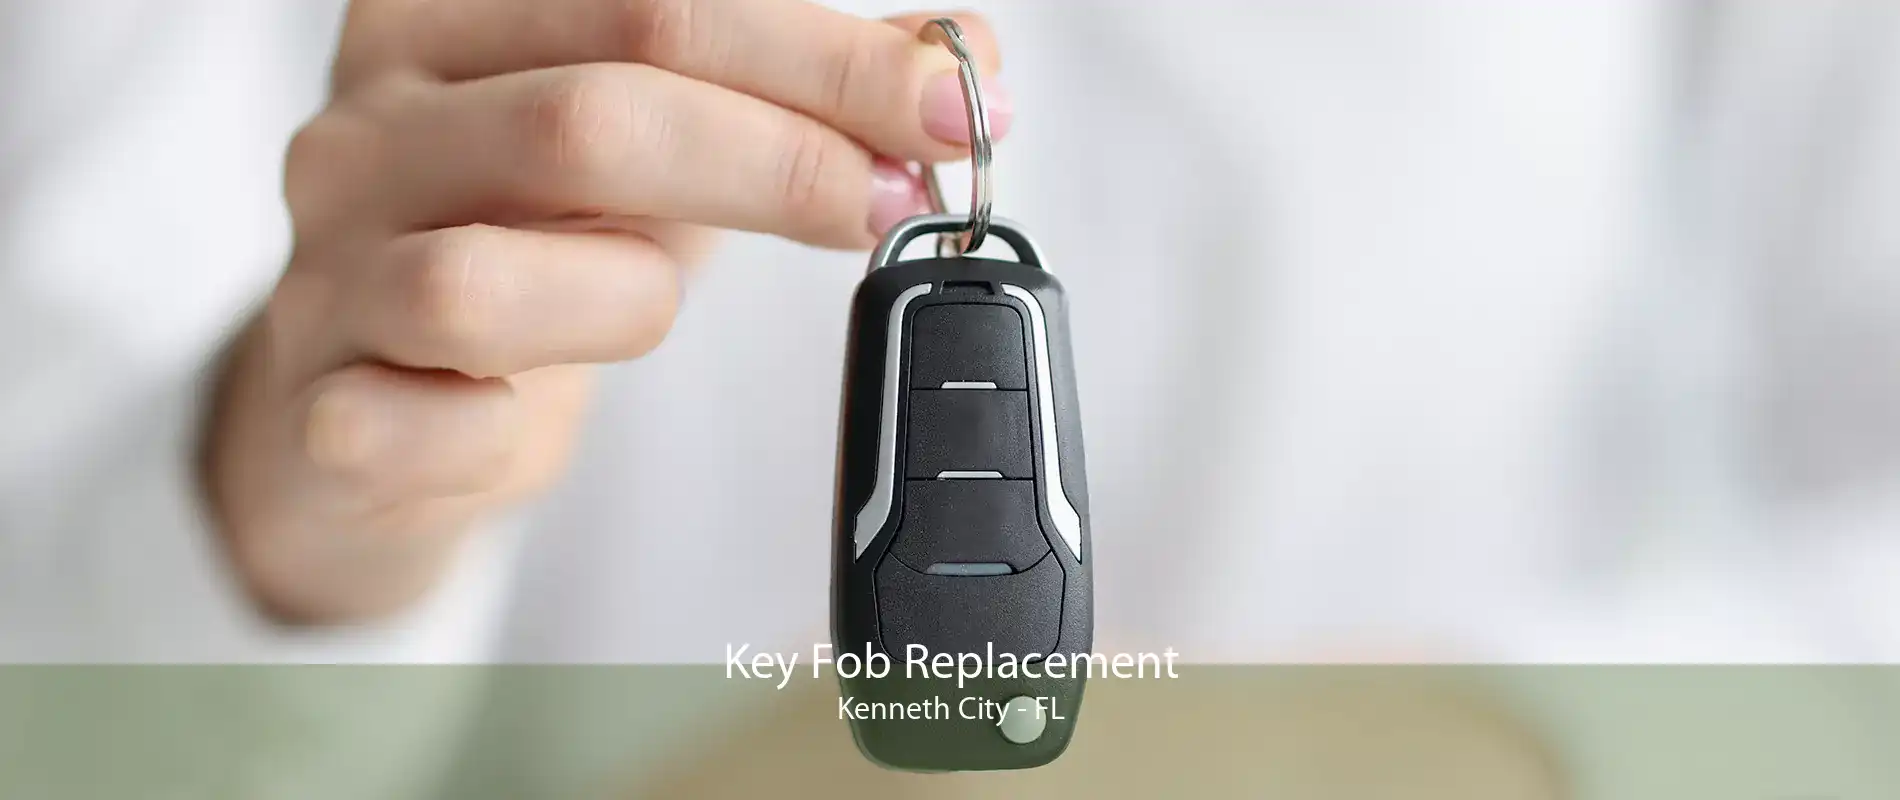 Key Fob Replacement Kenneth City - FL